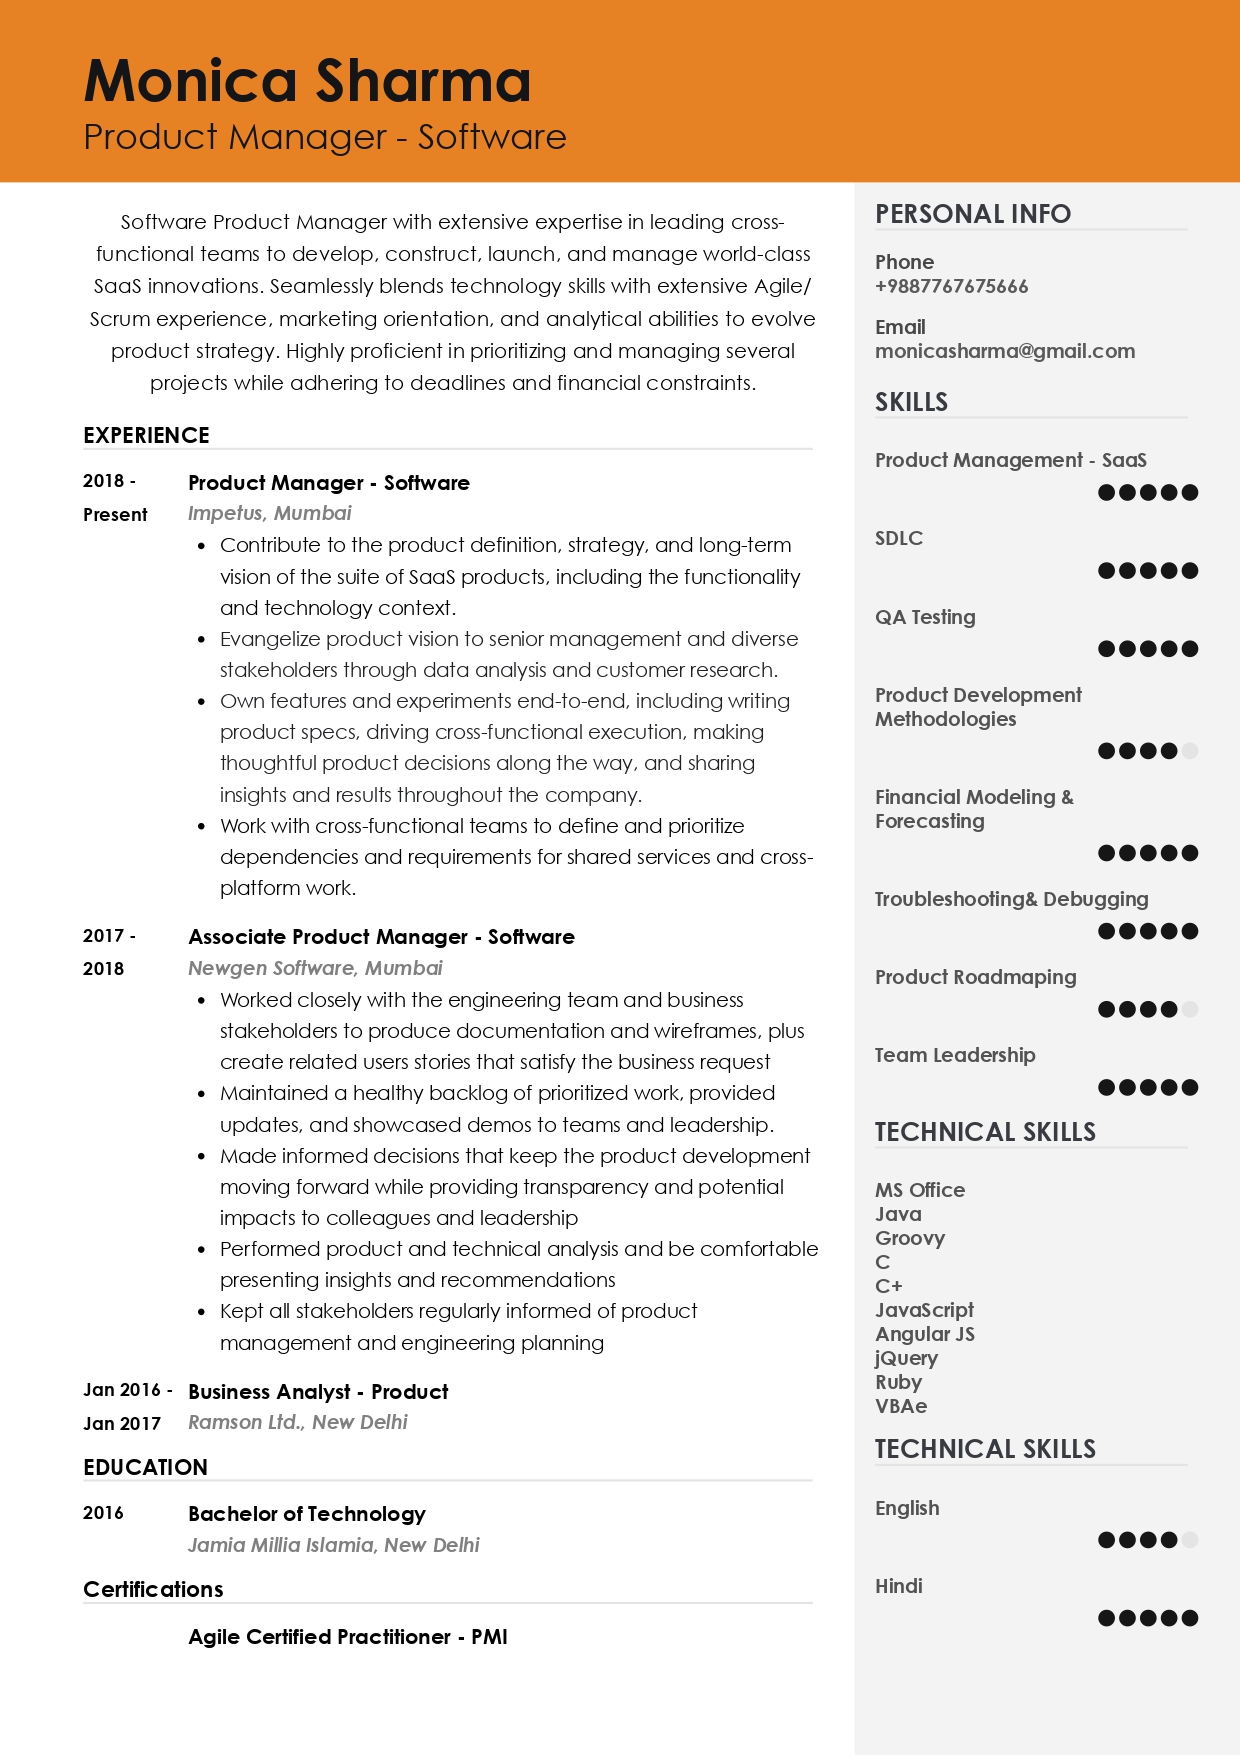 Sample Resume of  Product Manager-Software | Free Resume Templates & Samples on Resumod.co